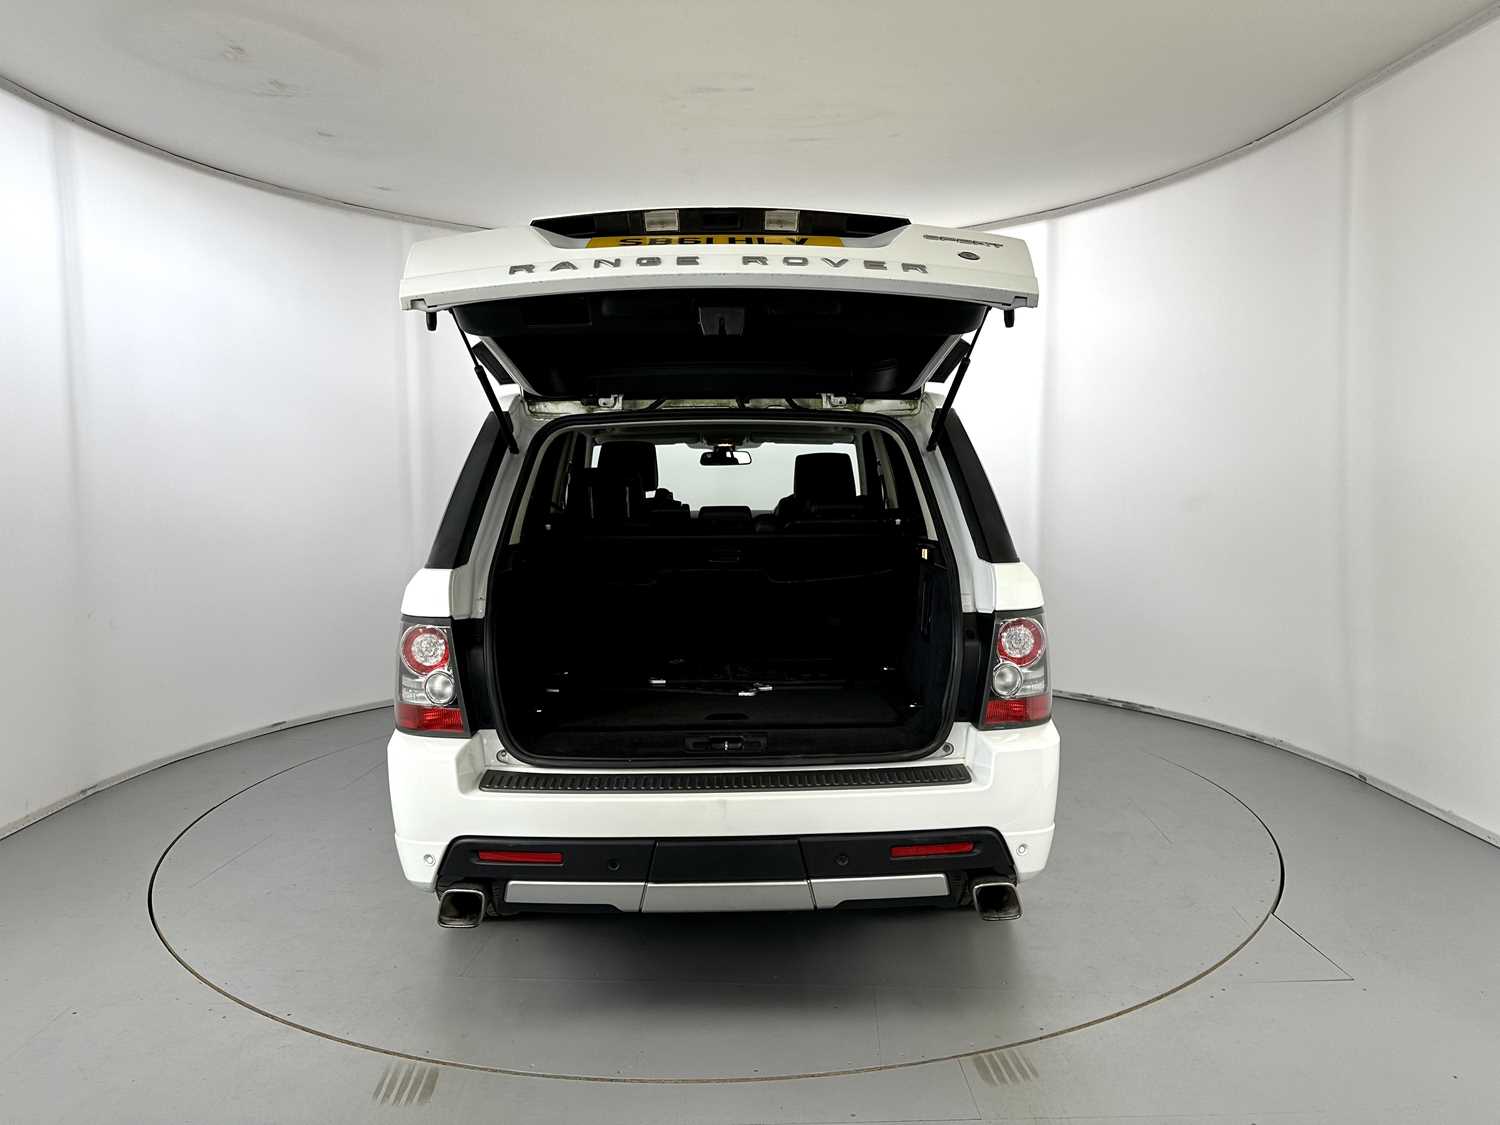 2011 Land Rover Range Rover Sport Stormer Edition  - Image 30 of 33